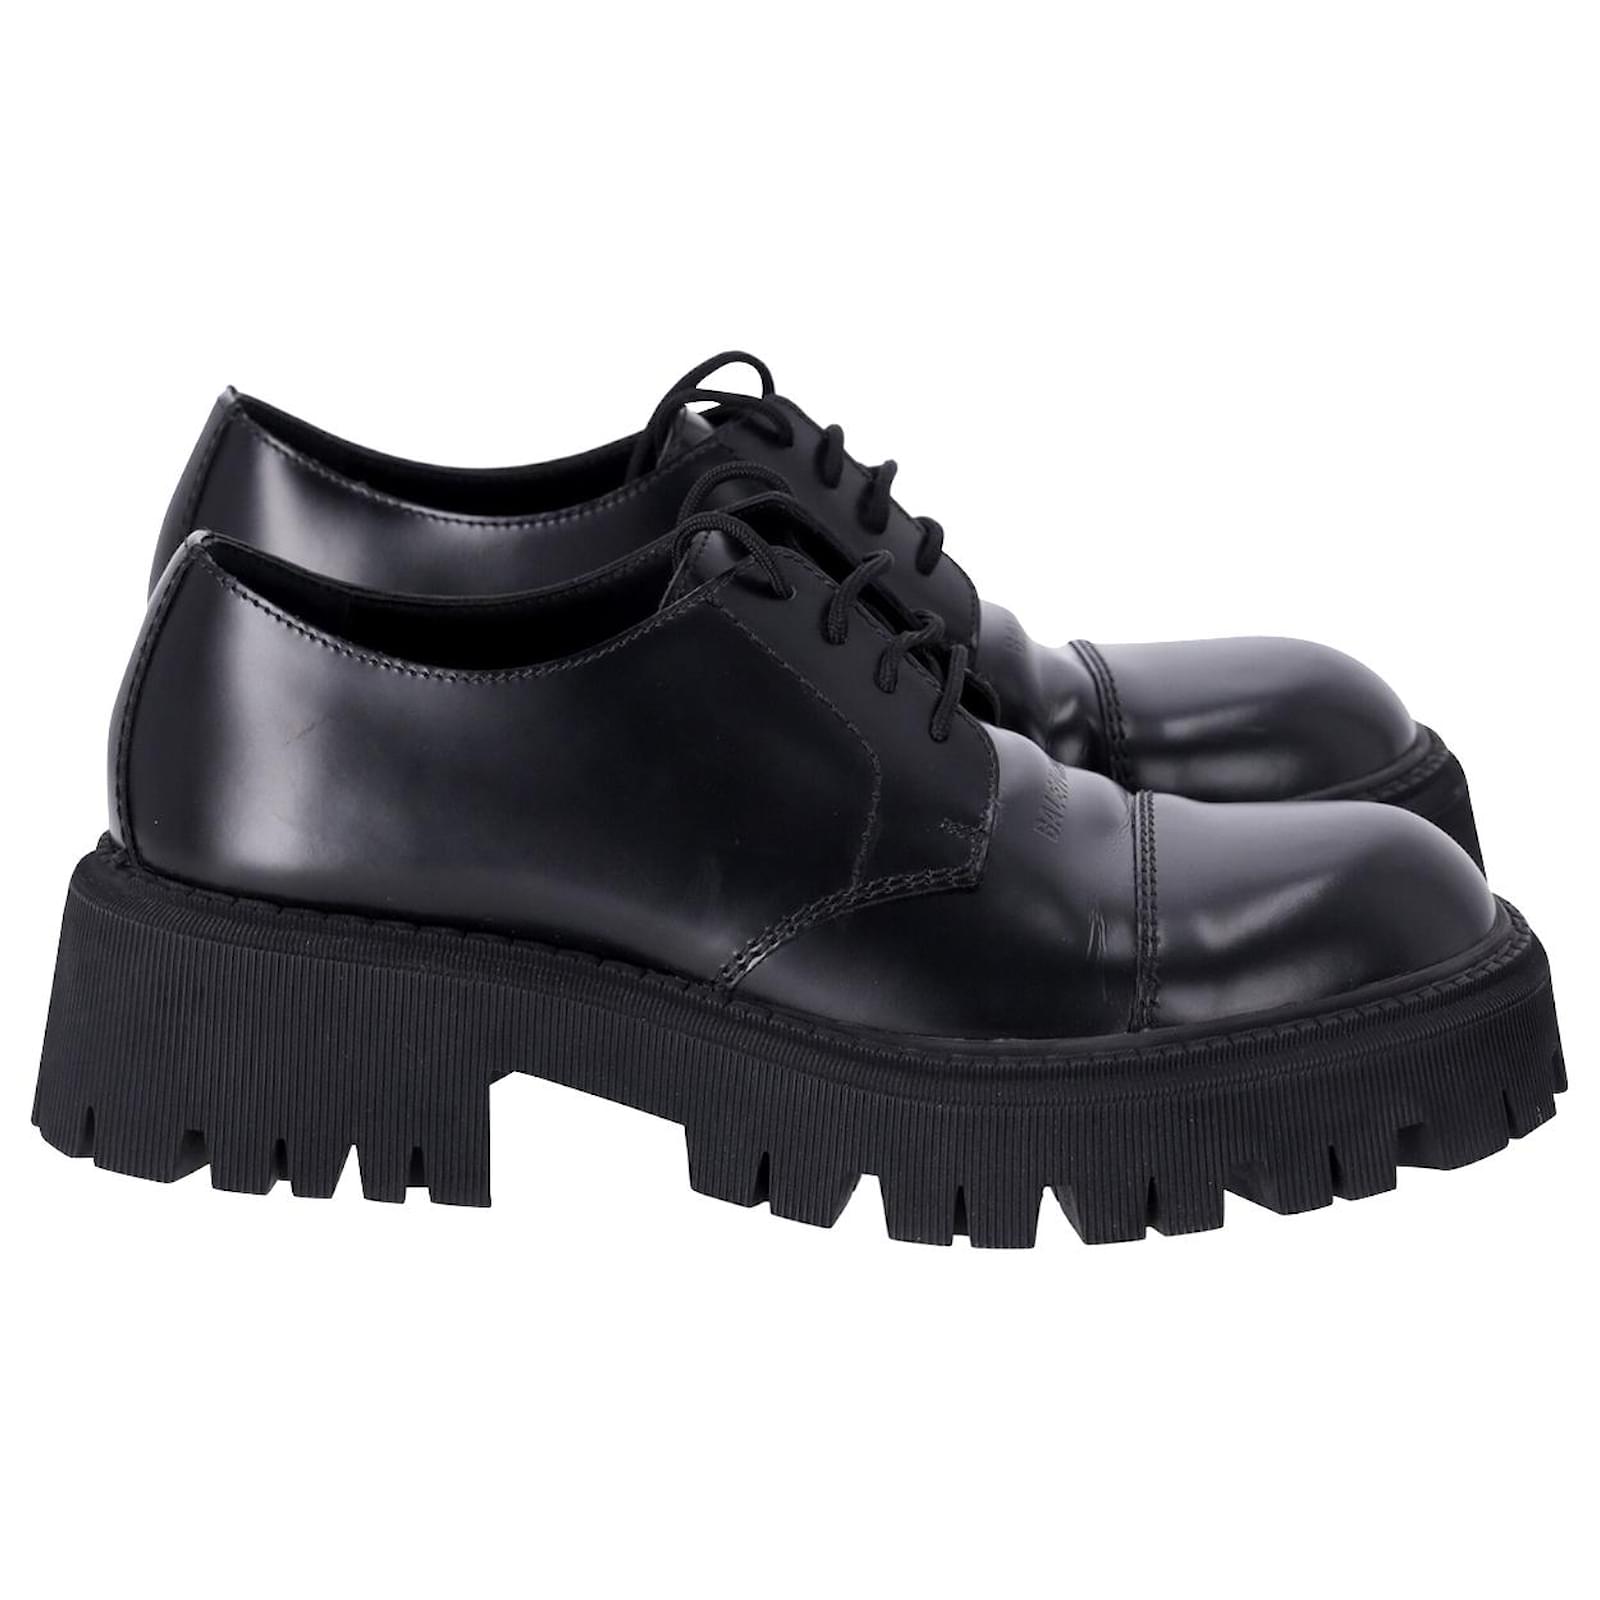 Balenciaga Tractor 60 Lace-Up Derby Shoes in Black Leather ref